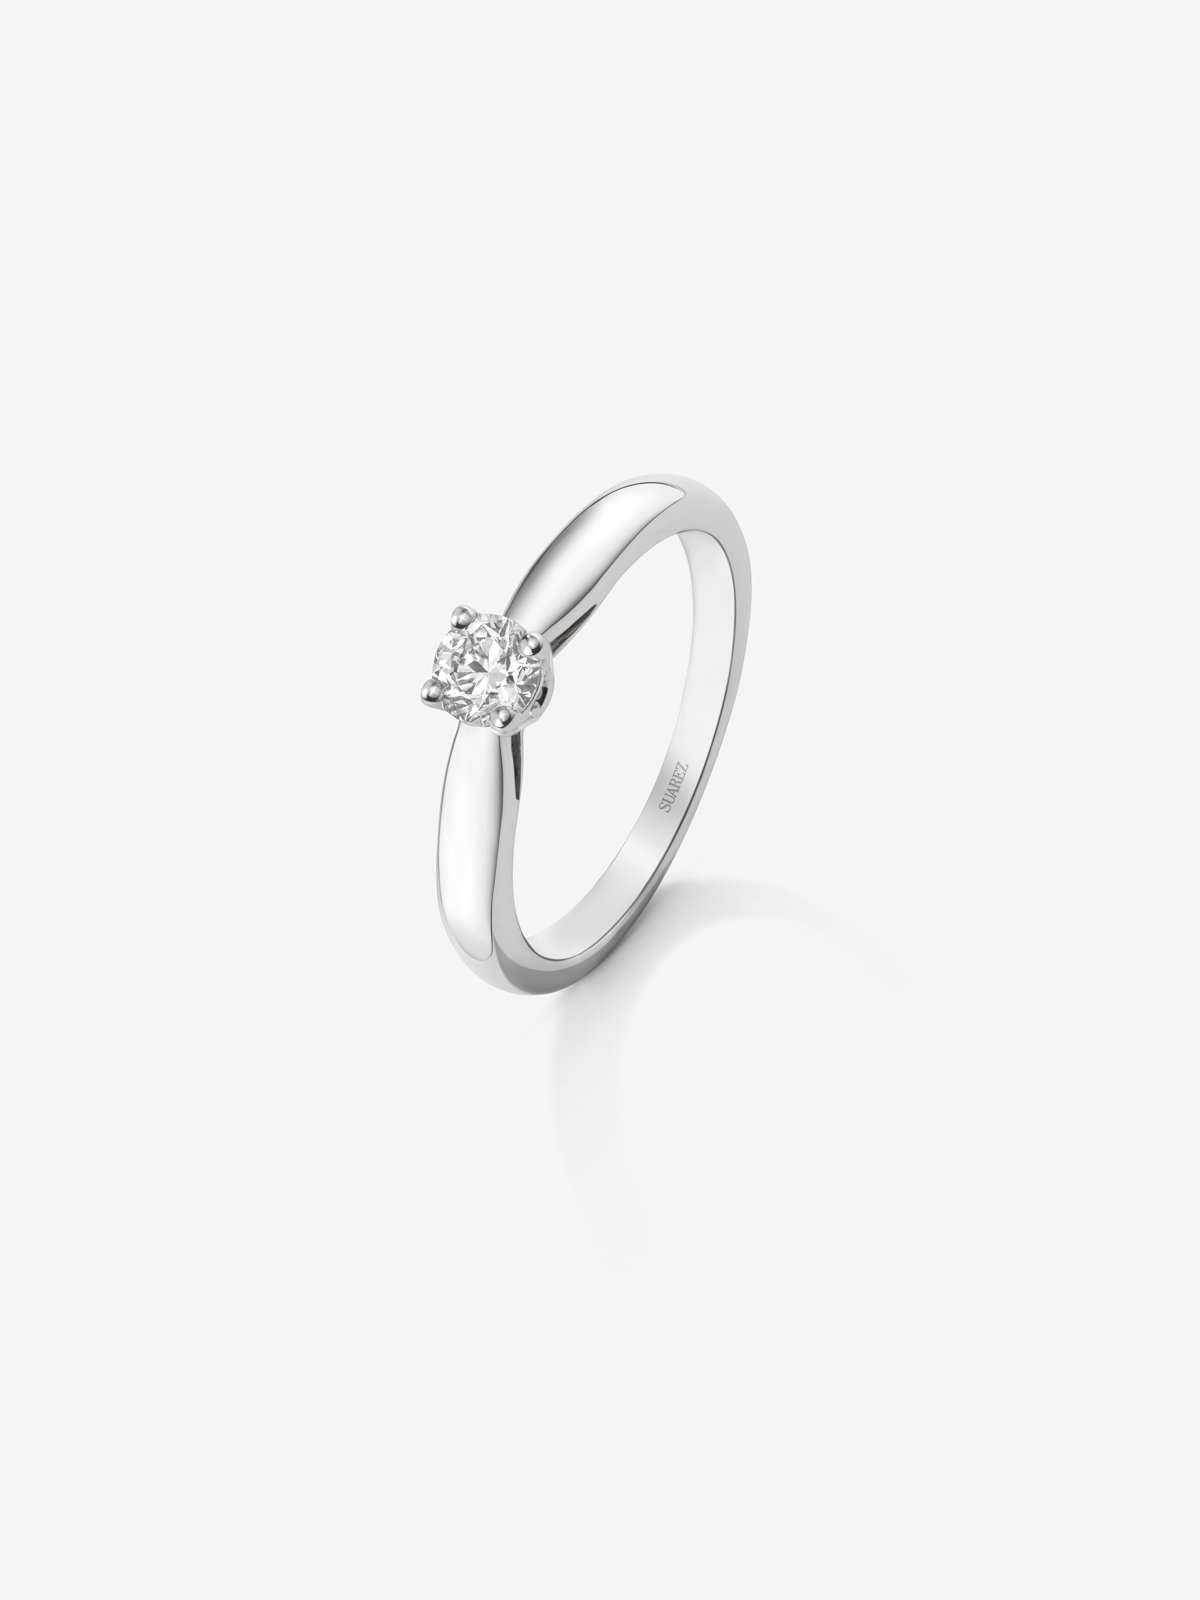 18K White Gold Commitment Ring with Diamonds